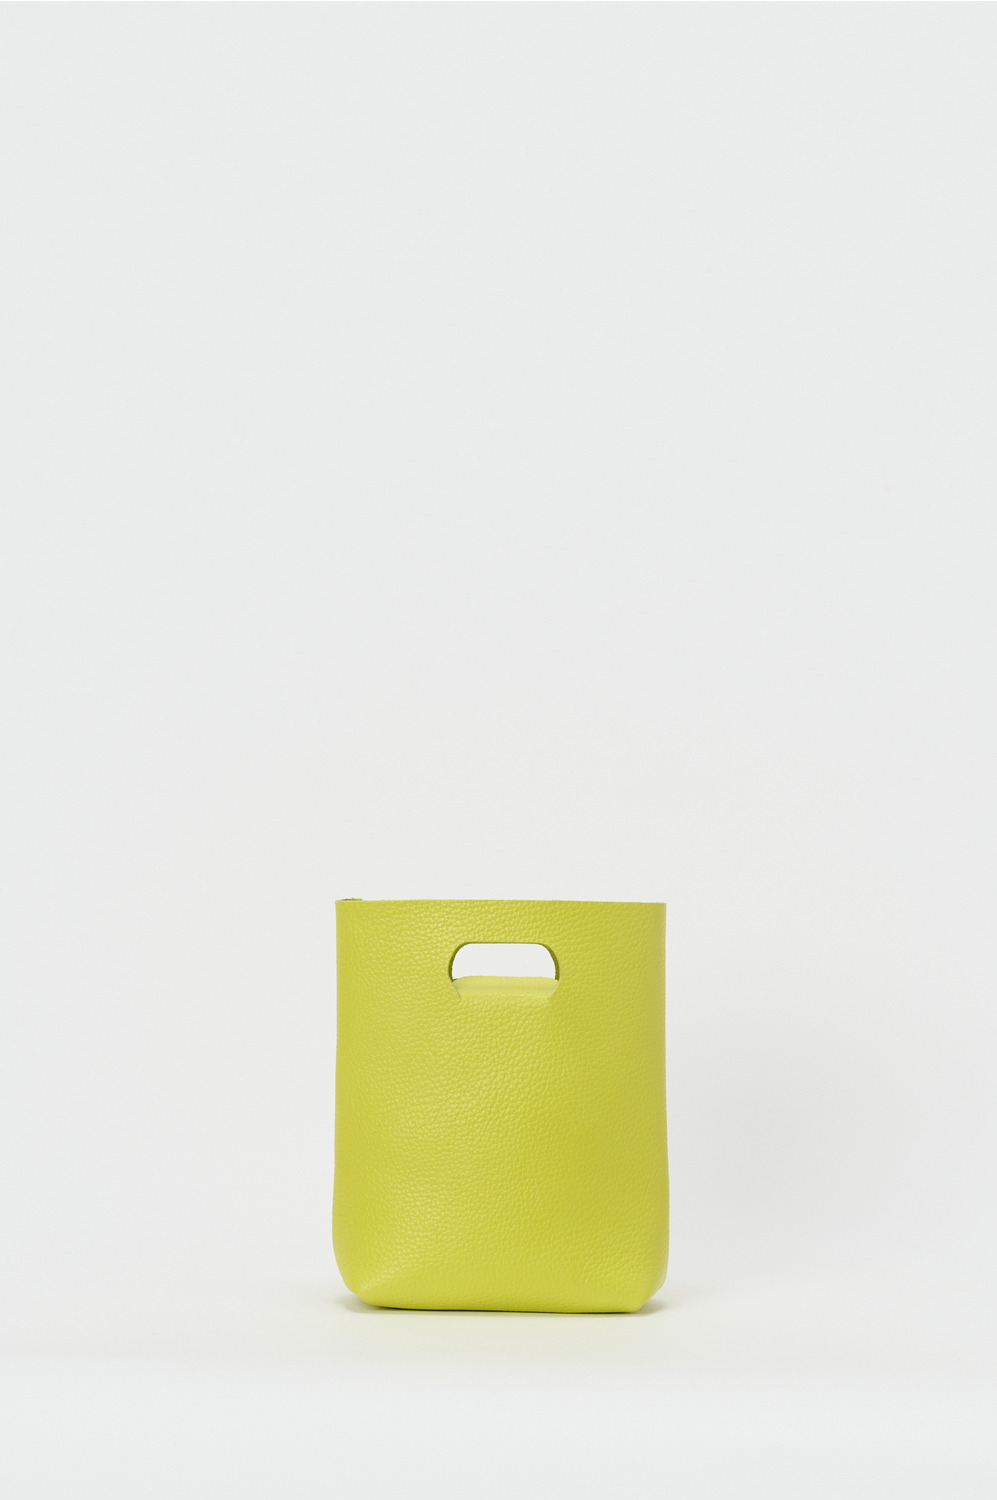 not eco bag small 詳細画像 lime green 1